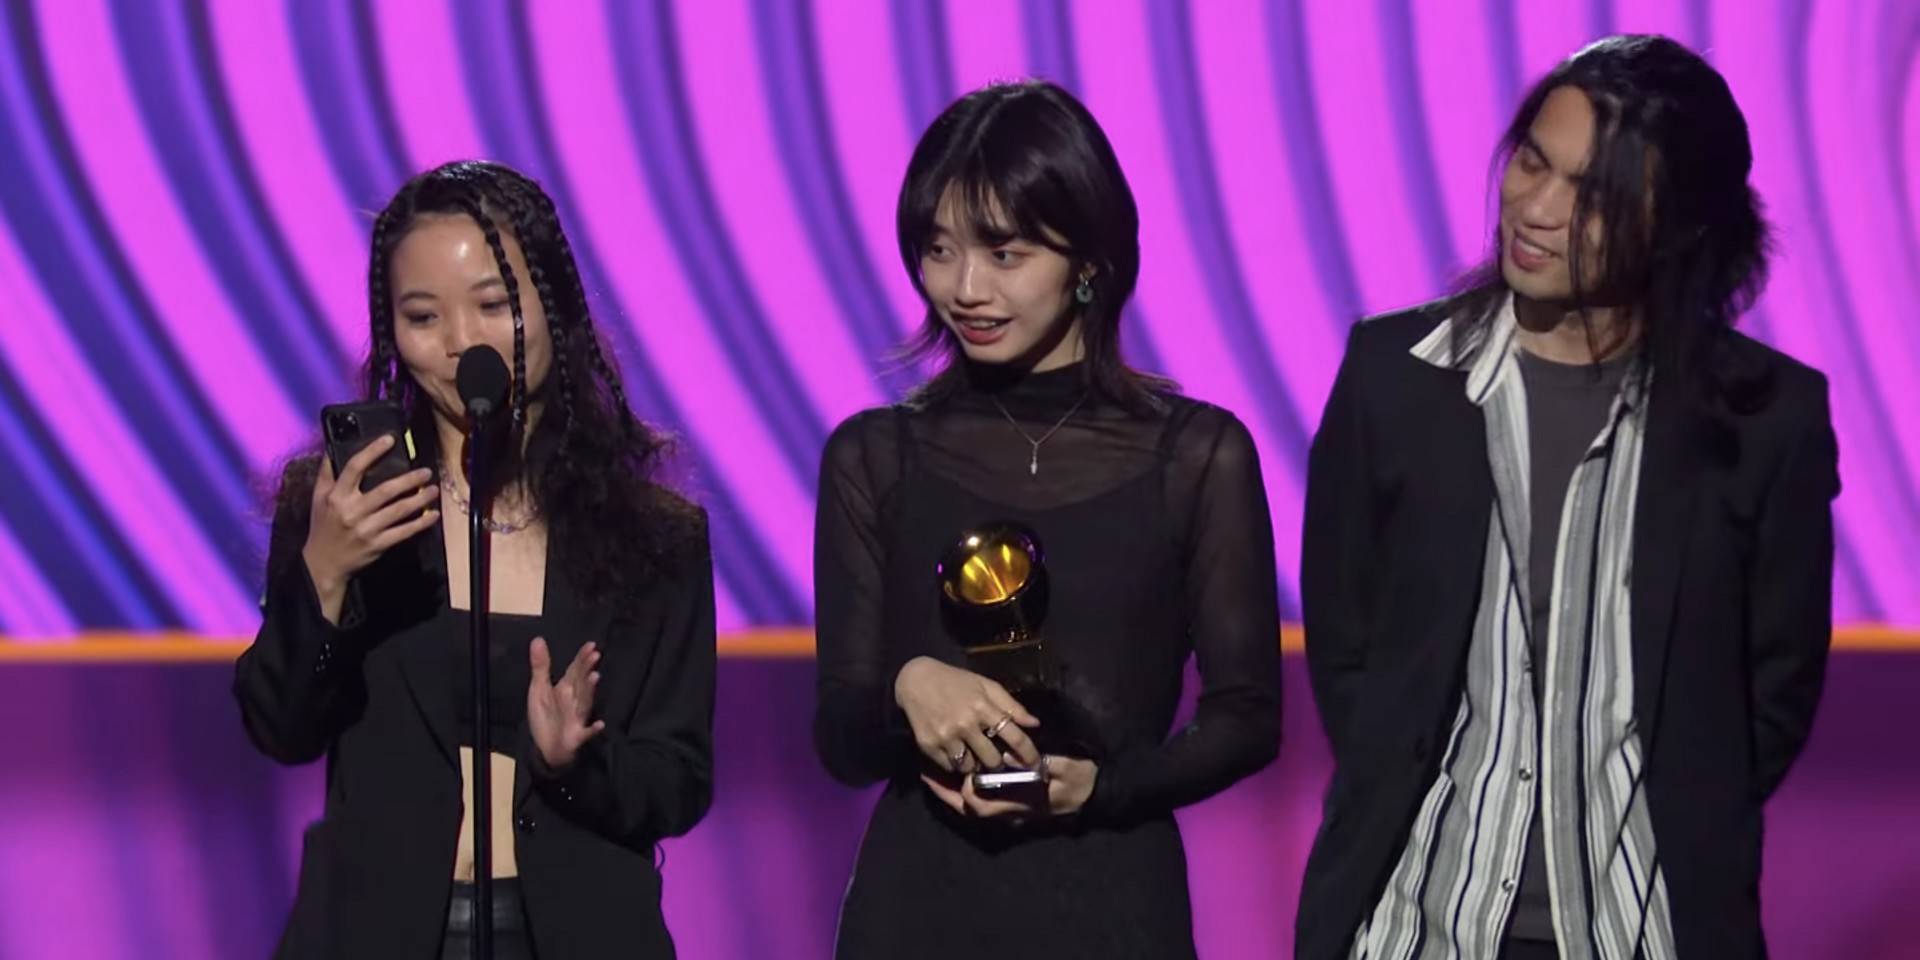 Taiwanese designers Li Jheng-han and Yu Wei win Best Recording Package at 64th GRAMMY Awards